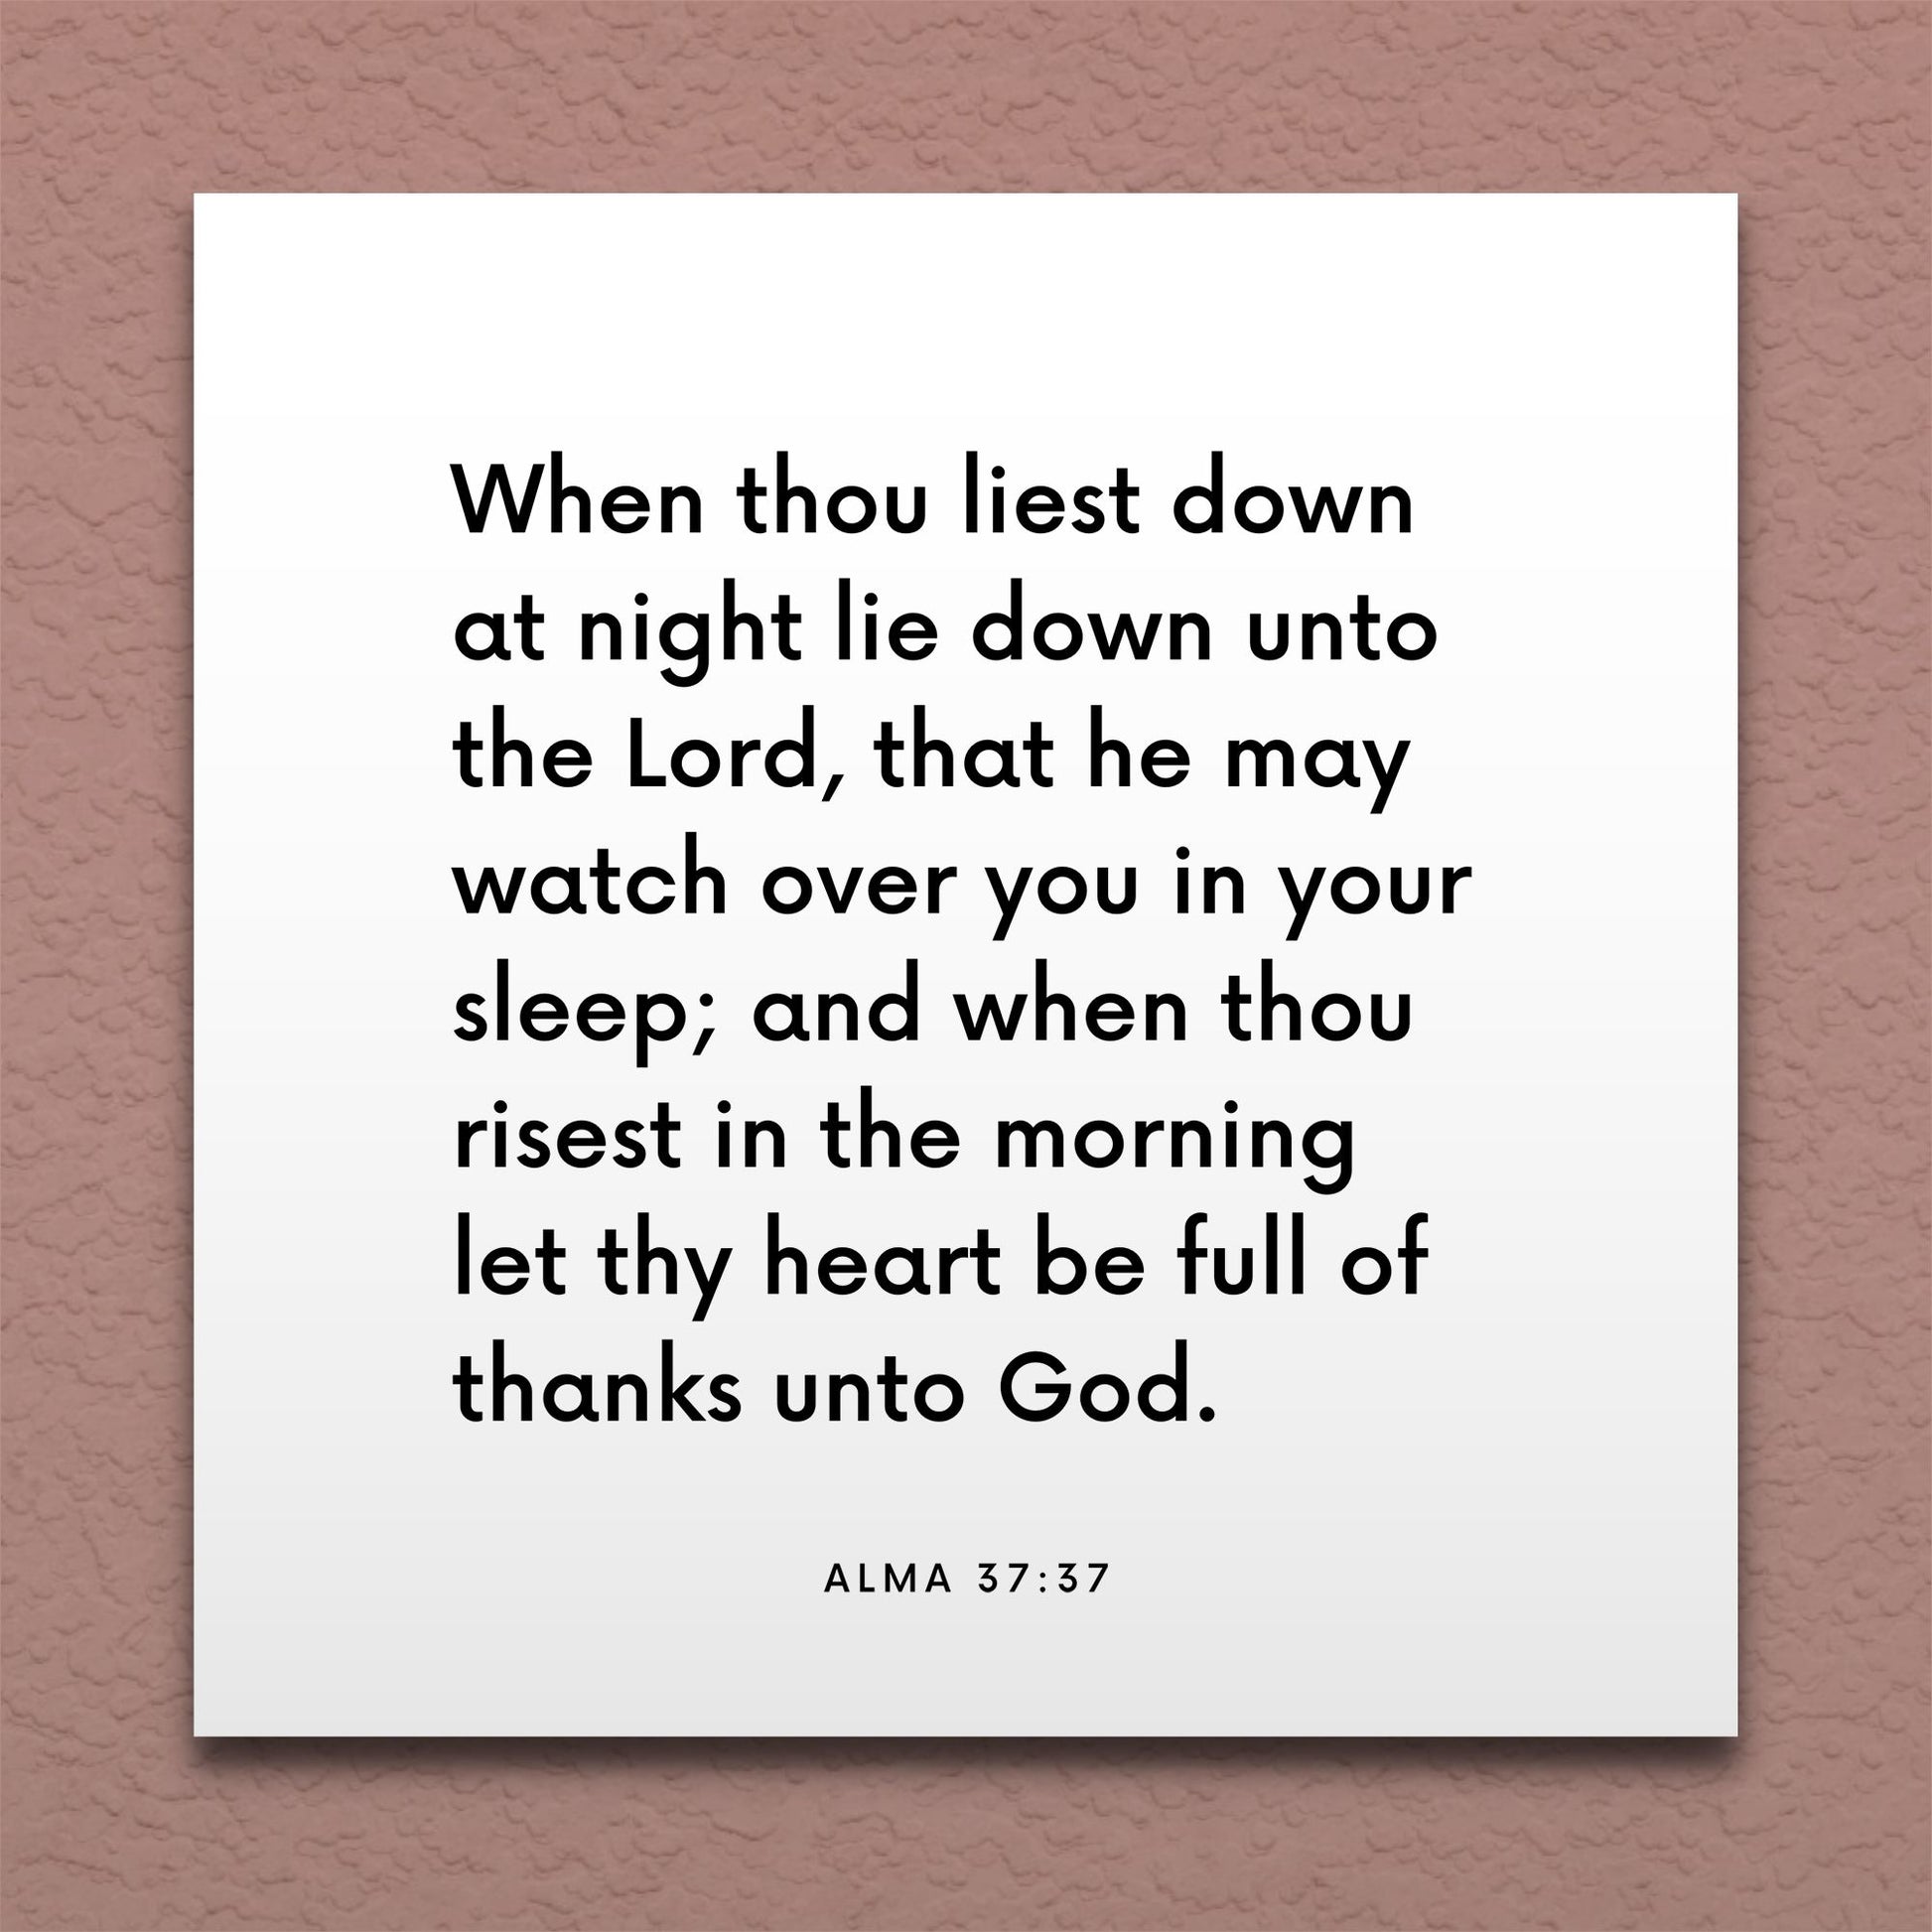 Wall-mounted scripture tile for Alma 37:37 - "When thou liest down at night lie down unto the Lord"